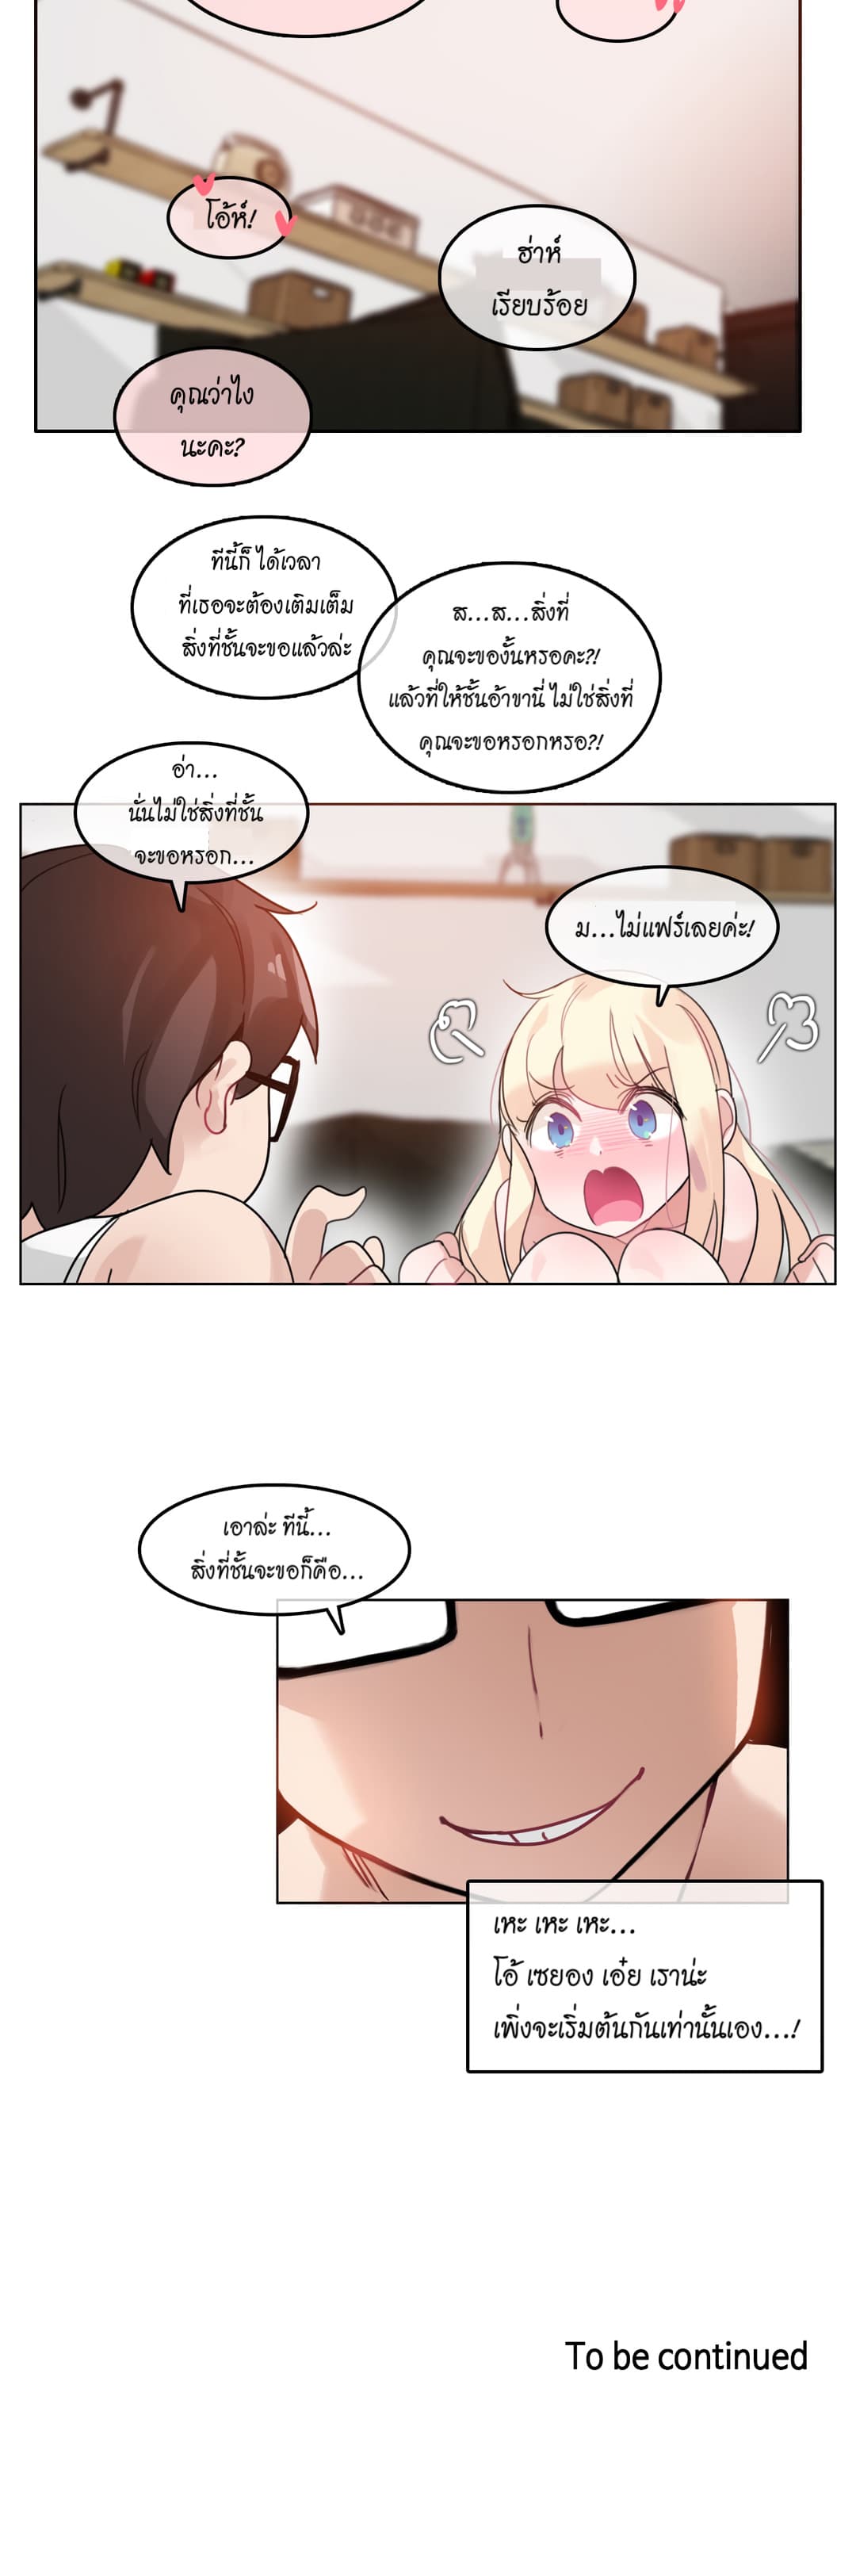 A Pervert’s Daily Life 34 (22)